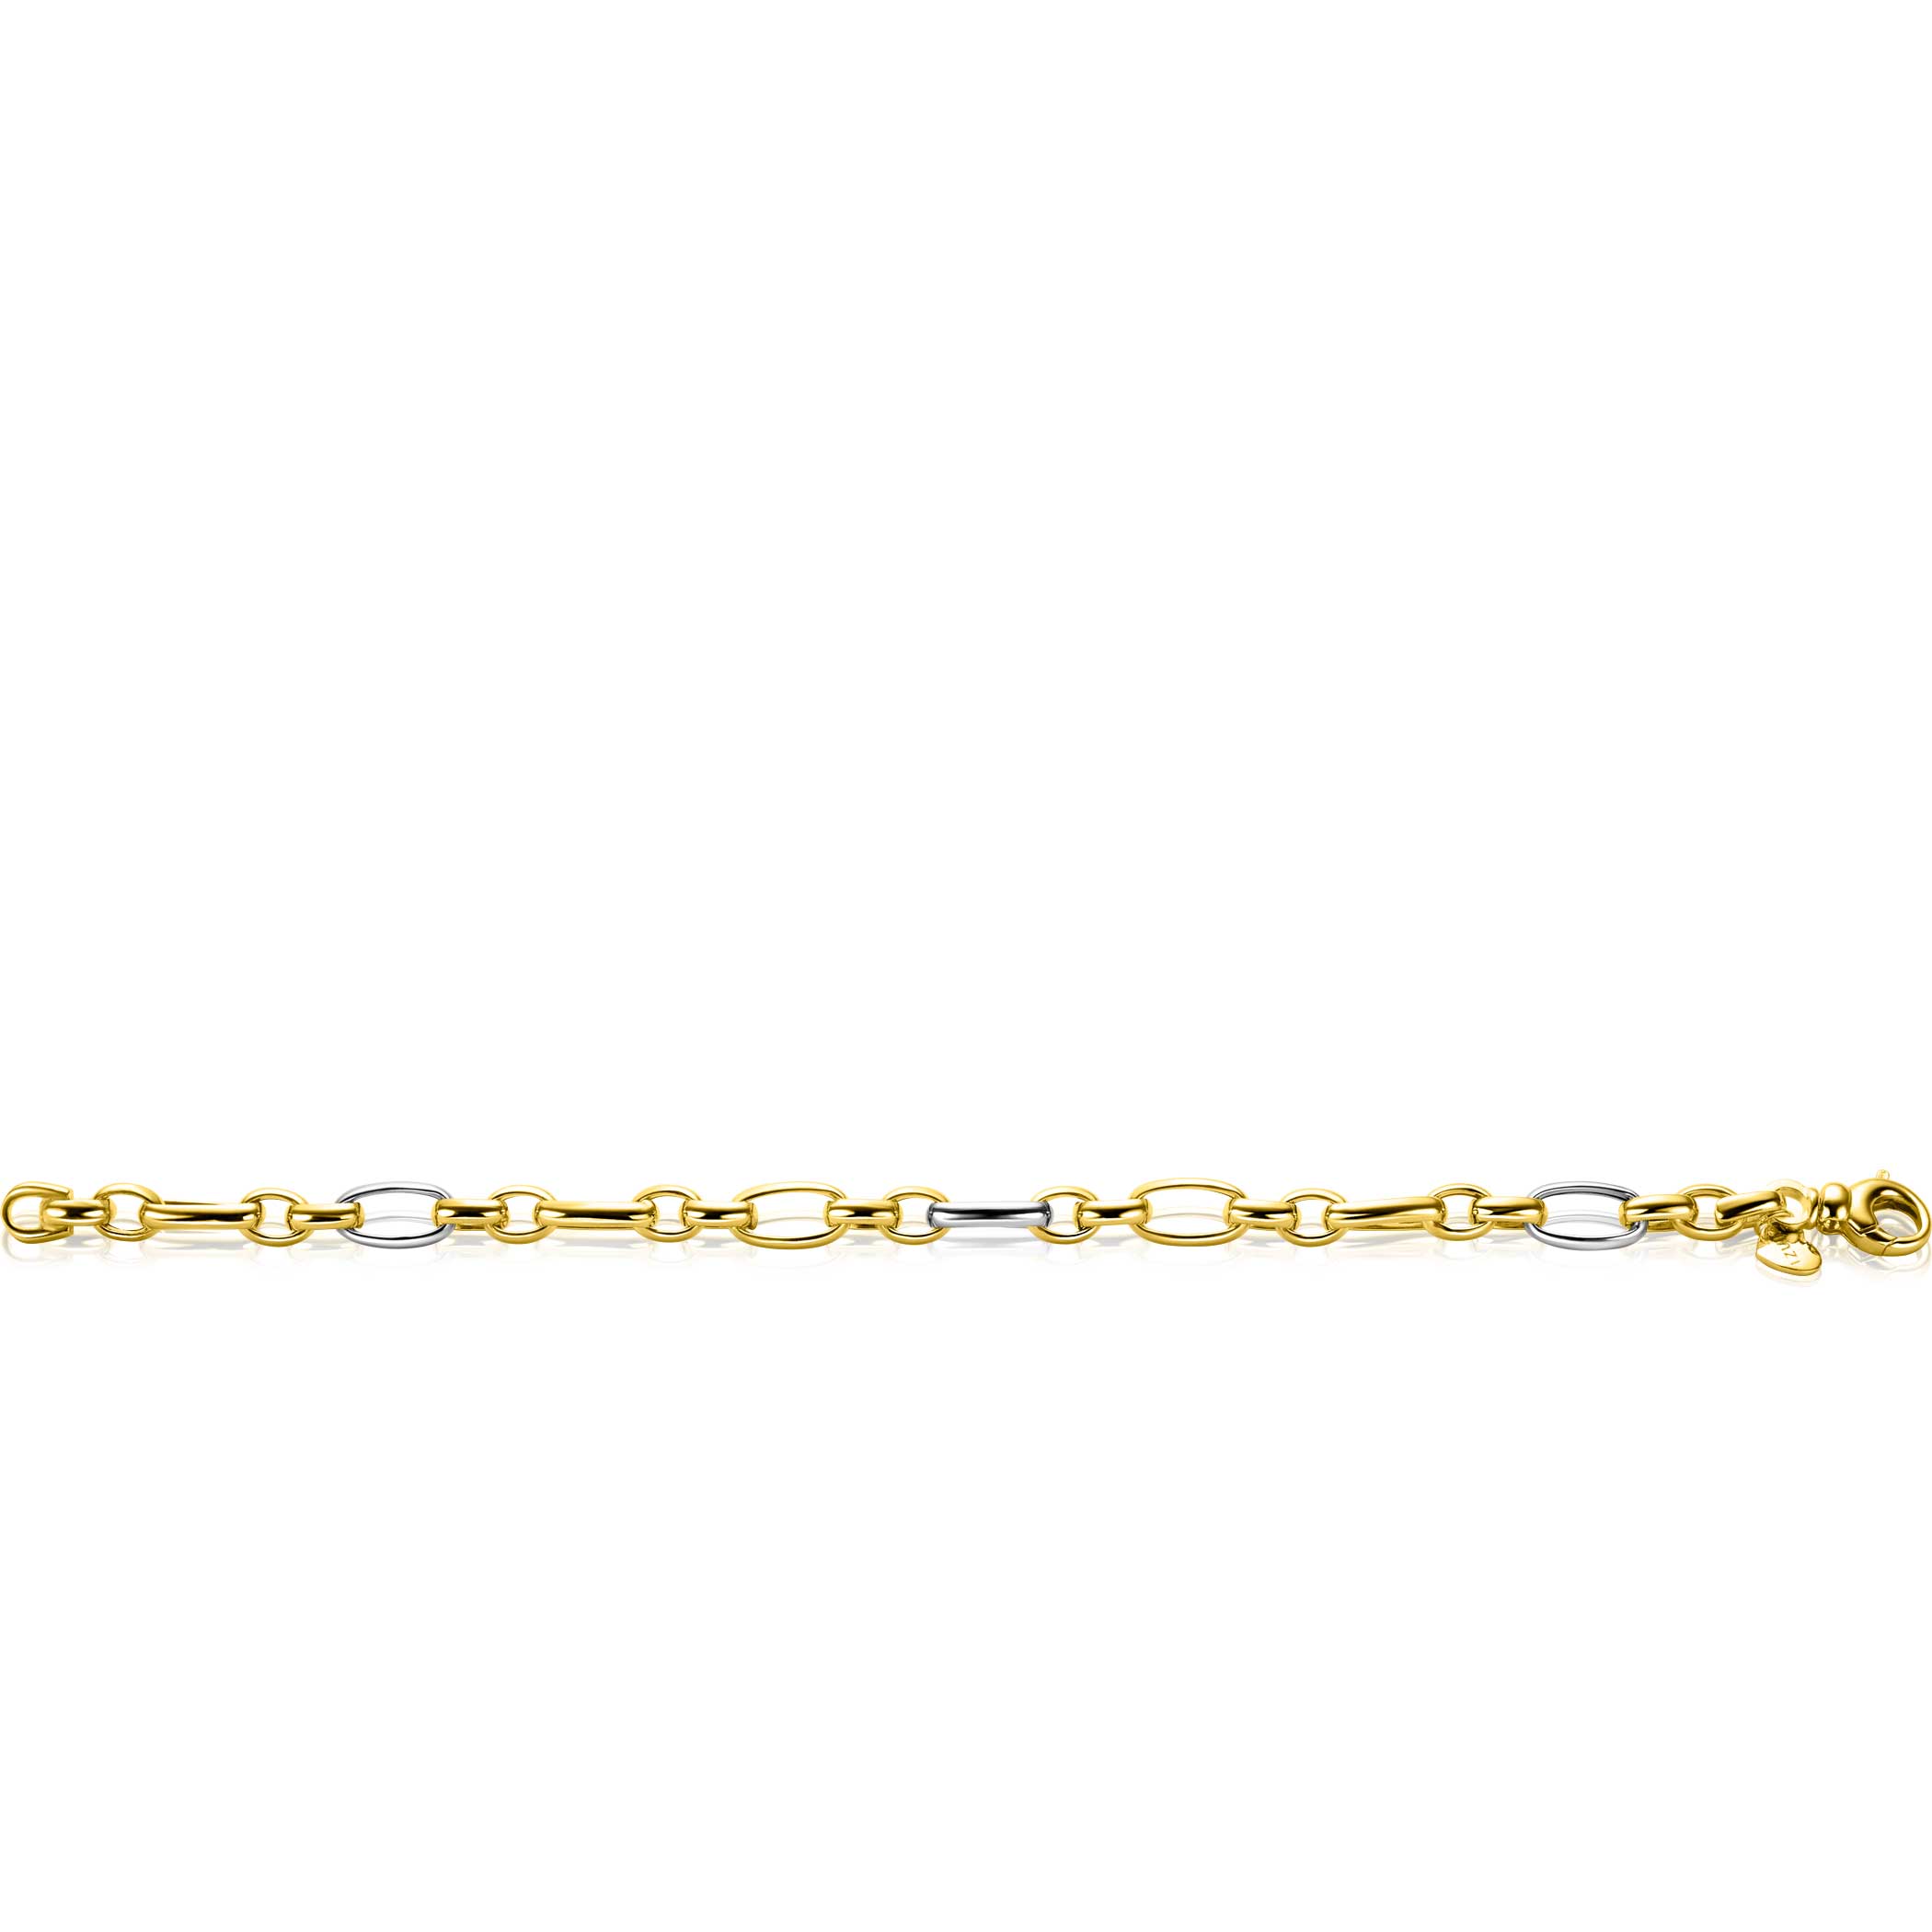 ZINZI bicolor chain bracelet (7mm wide) with alternating gold plated jasseron links and large silver oval links 19cm ZIA2639